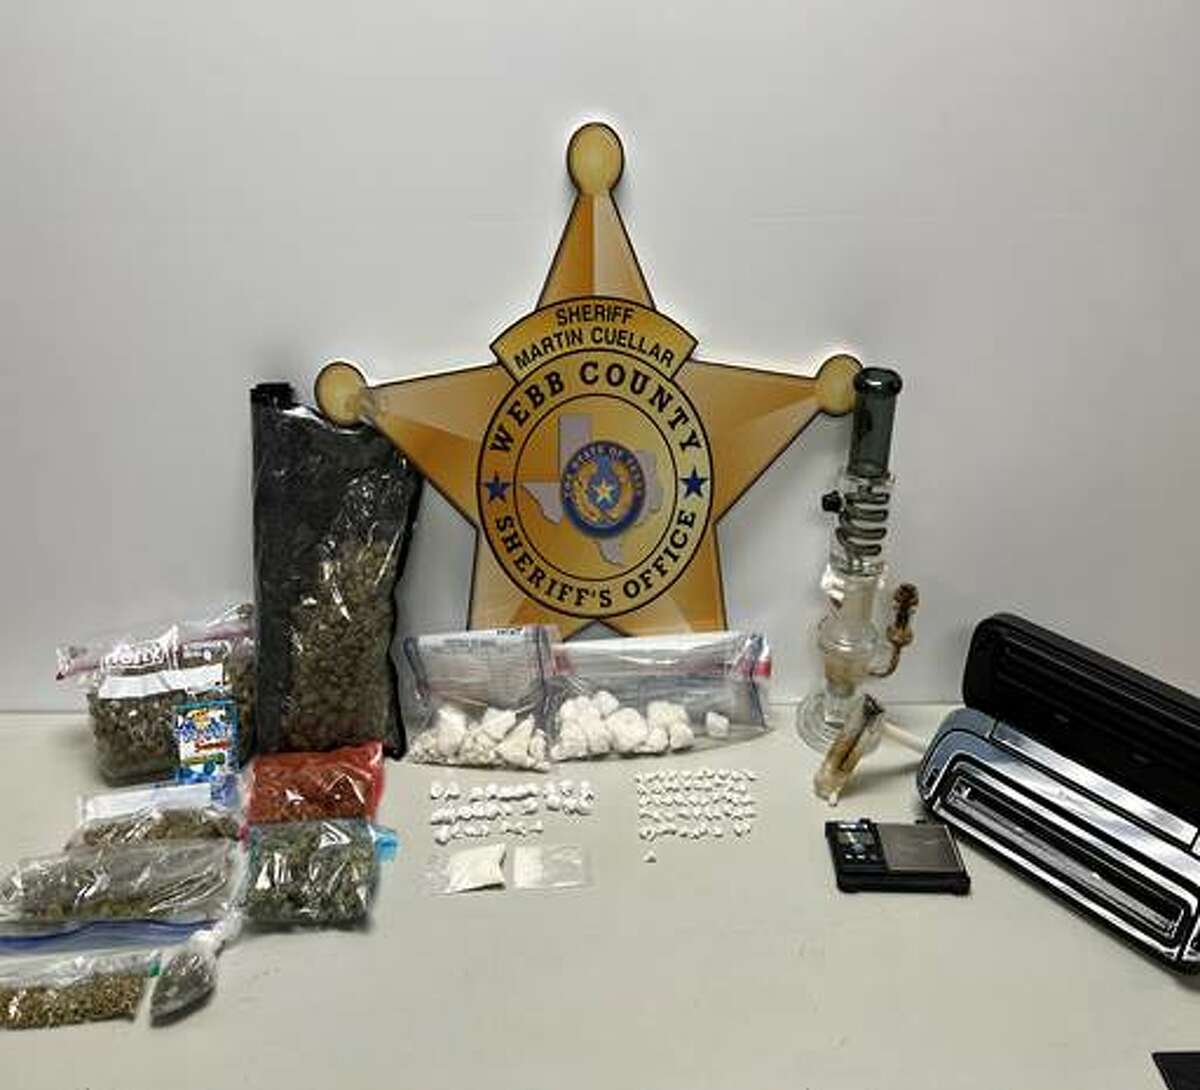 The Webb County Sheriff's Office seized these narcotics and drug paraphernalia after raiding a home on Sept. 14 in the 3900 block of Barcelona Avenue.